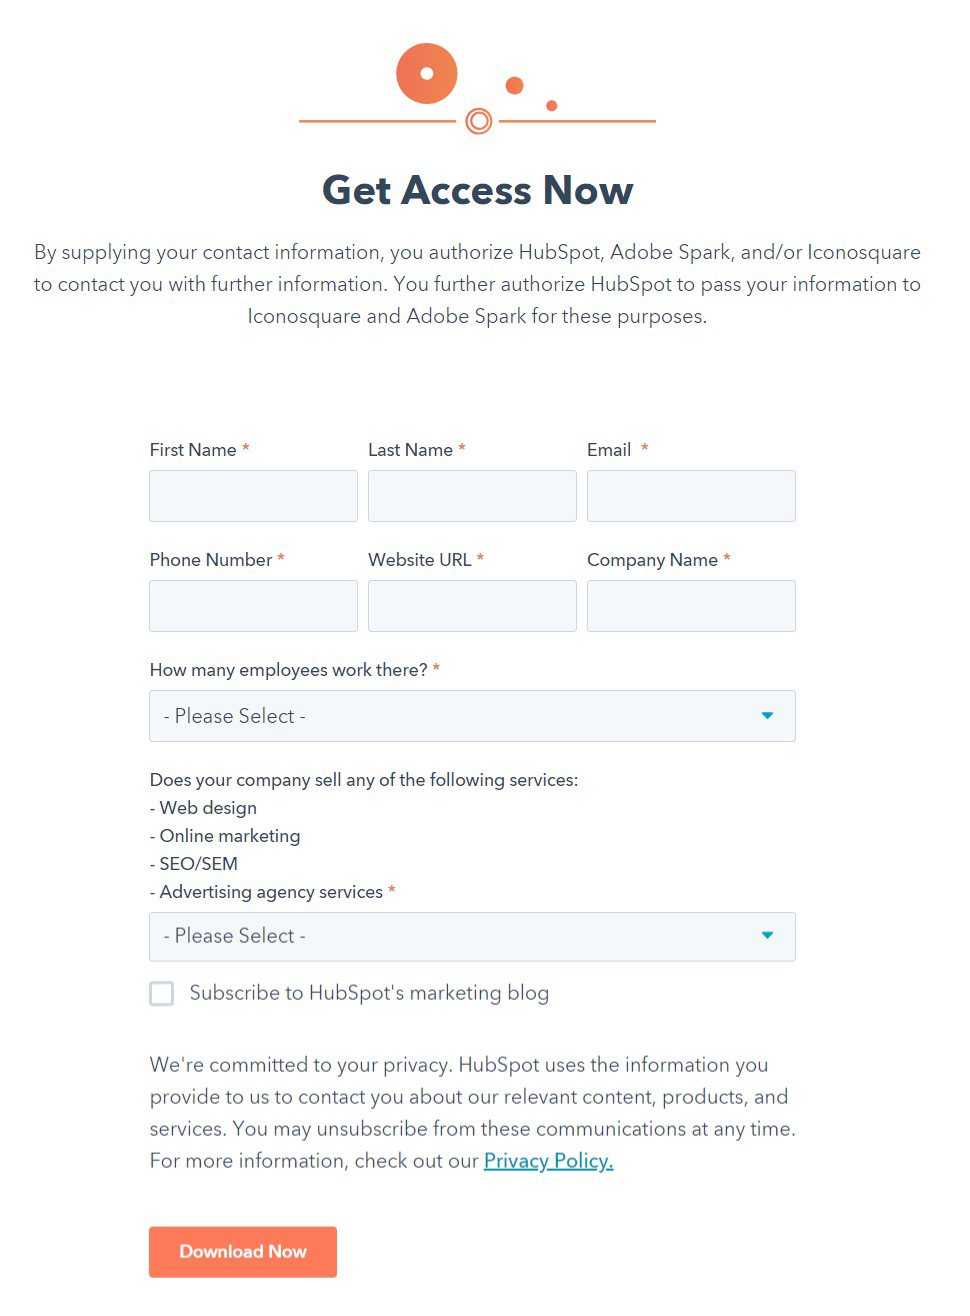 HubSpot Information collection form to download templates